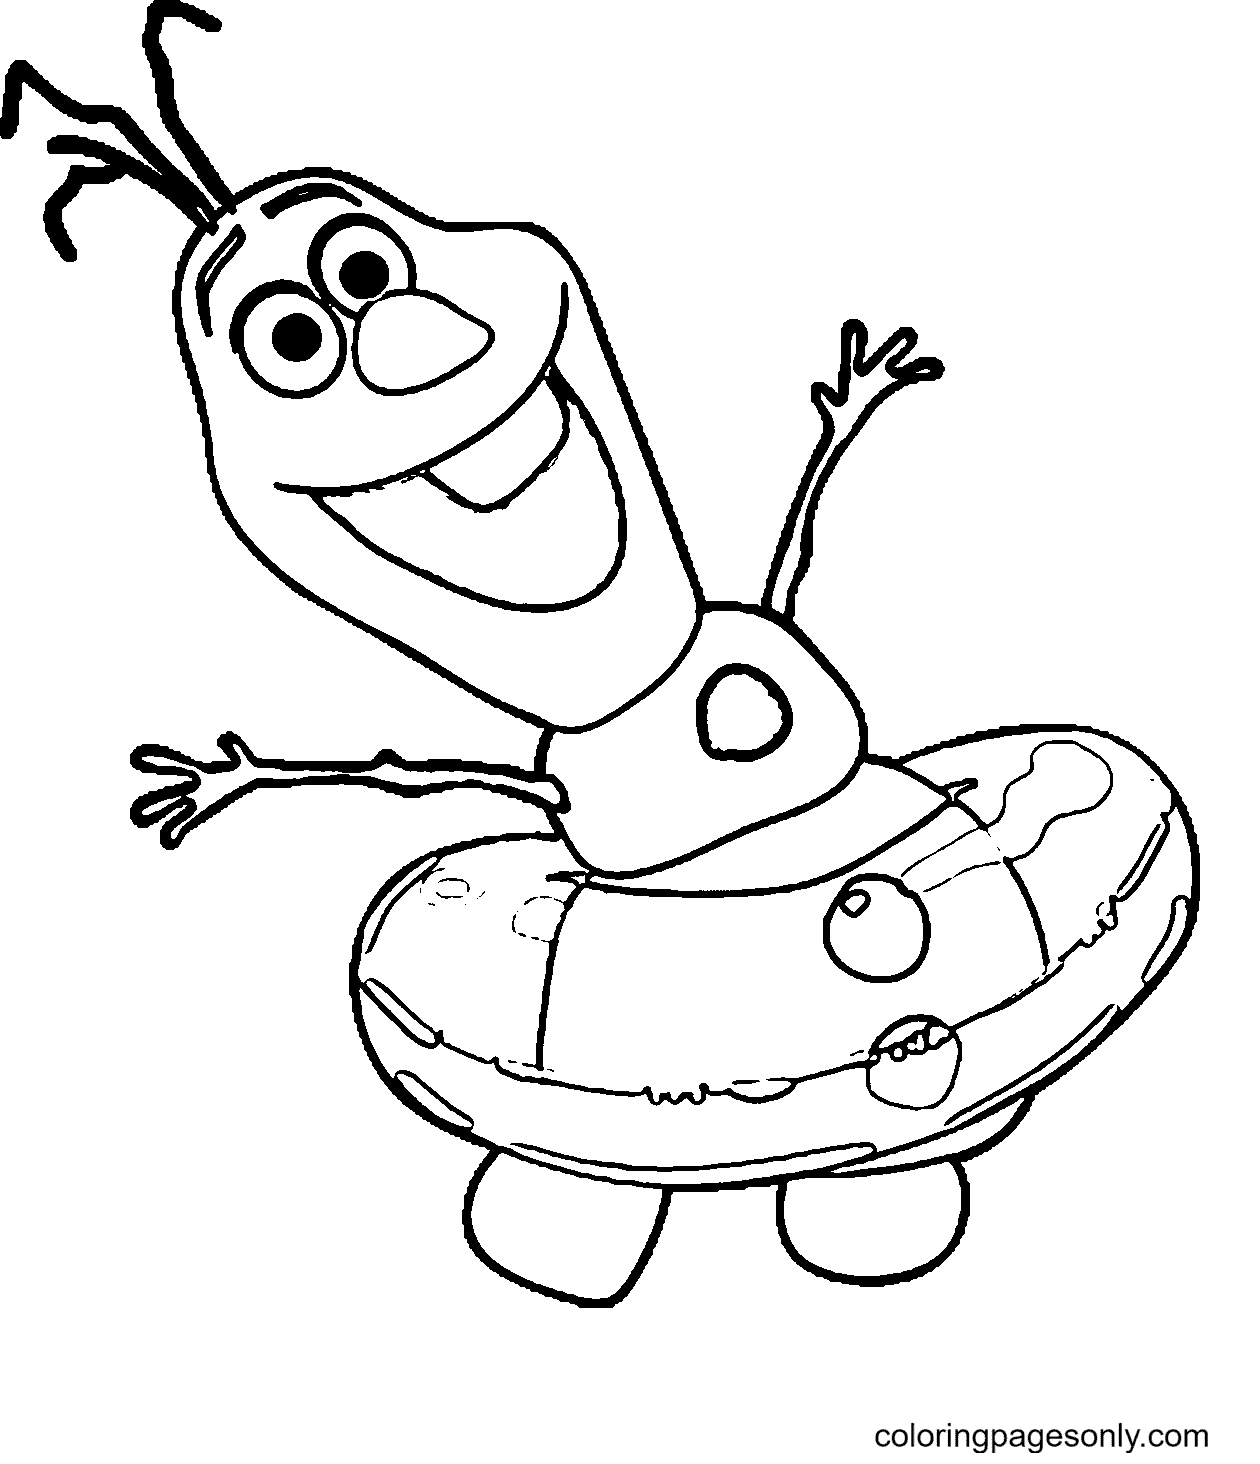 Olaf Summer Swimming Coloring Page